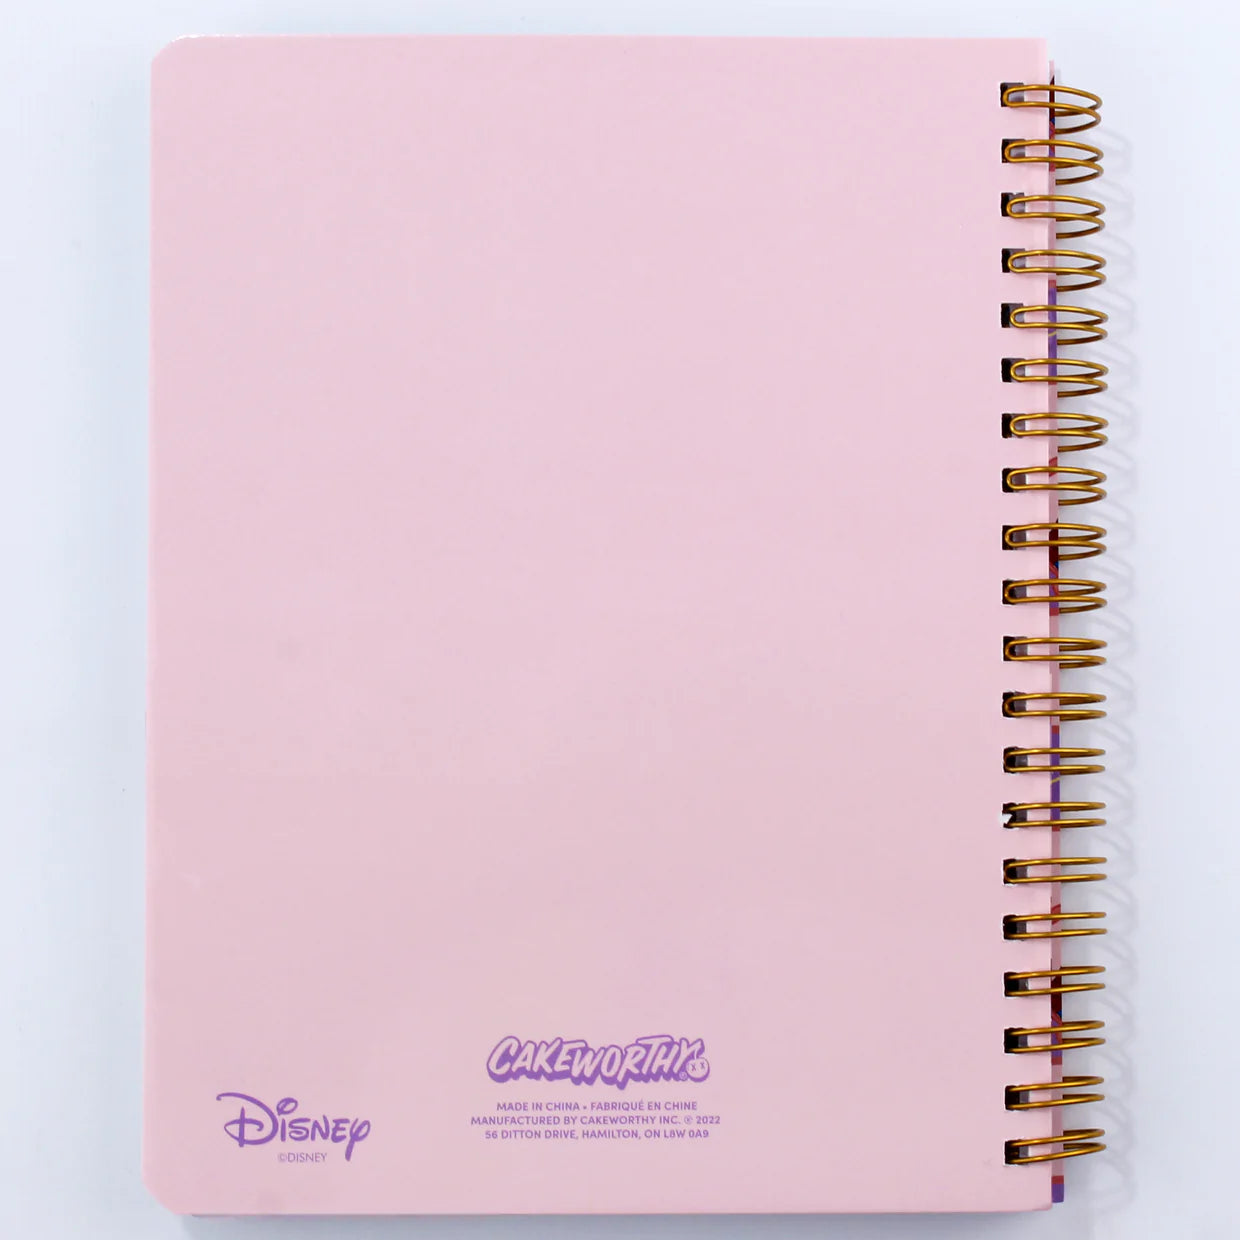 Snow White and Prince Charming (Disney) 90's Style Retro Notebook